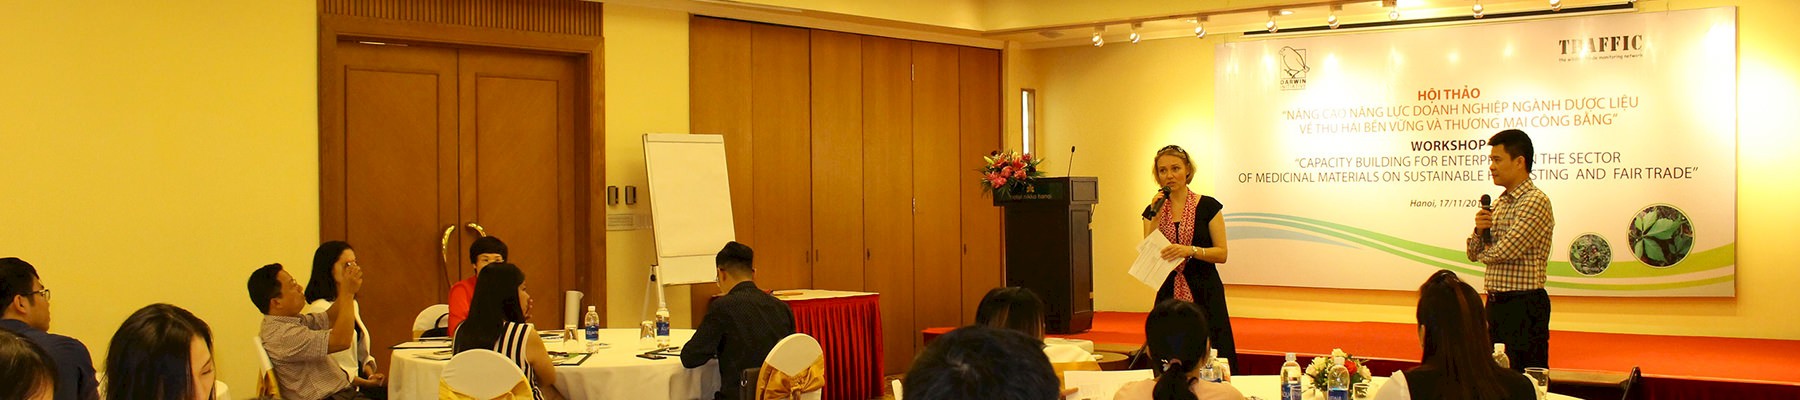 Madelon Willemsen, Director of TRAFFIC's Viet Nam office, addresses participants at the workshop